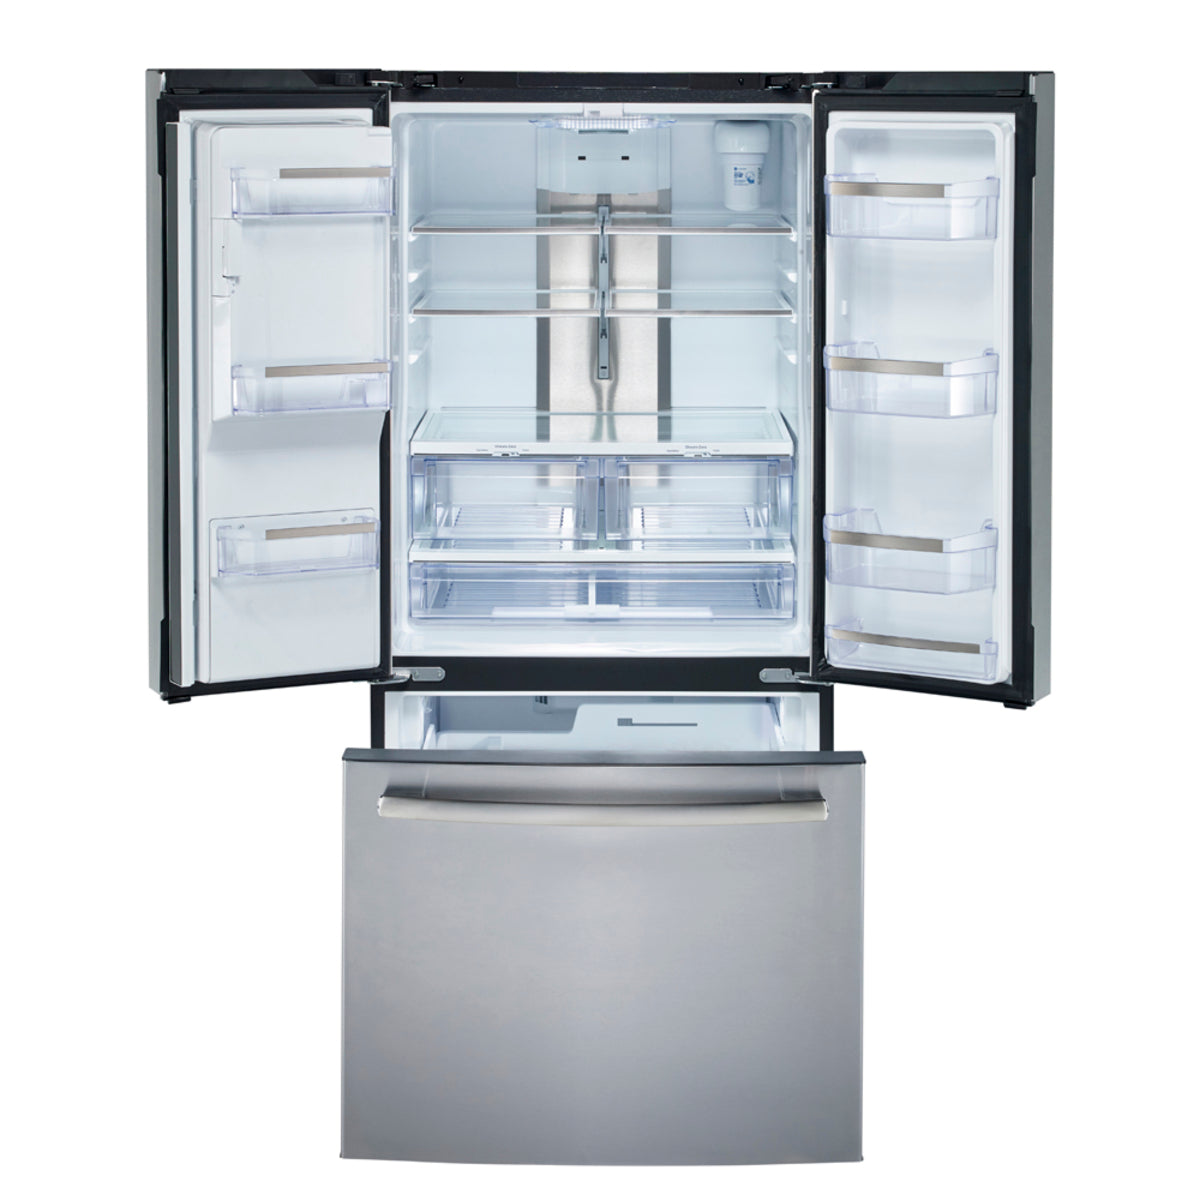 GE Profile - 32.75 Inch 23.6 cu. ft French Door Refrigerator in Stainless - PFE24HYRKFS